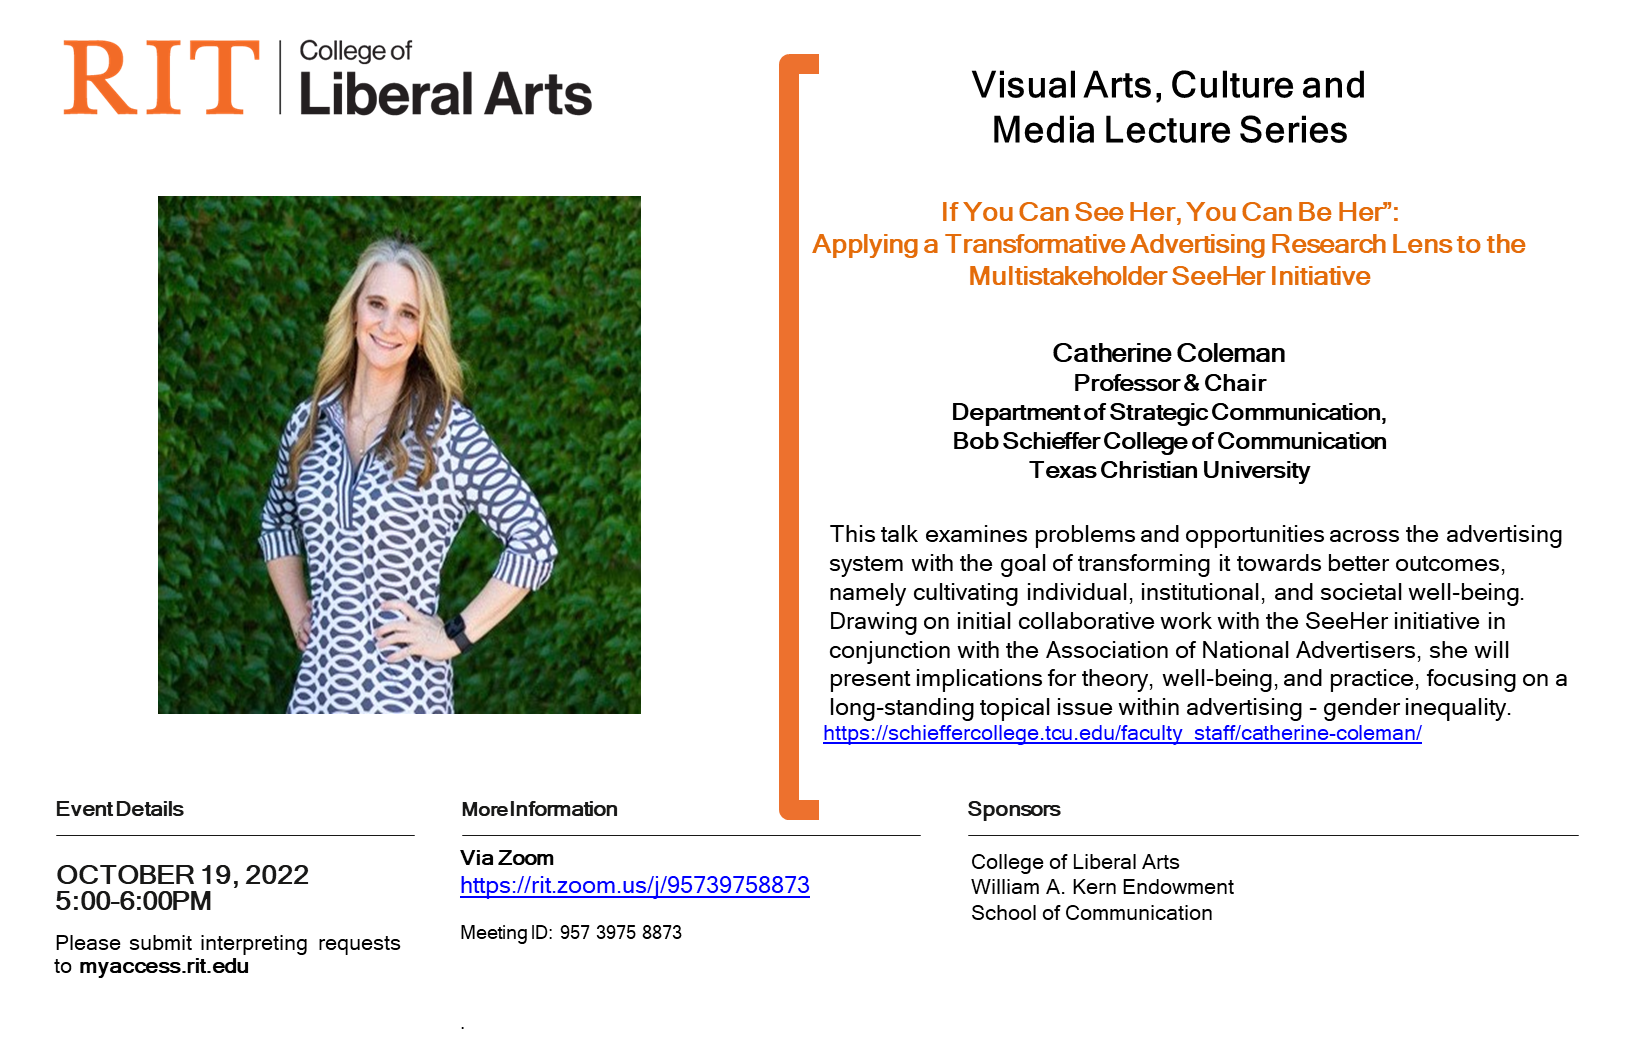 Visual Arts, Culture and Media Lecture Series